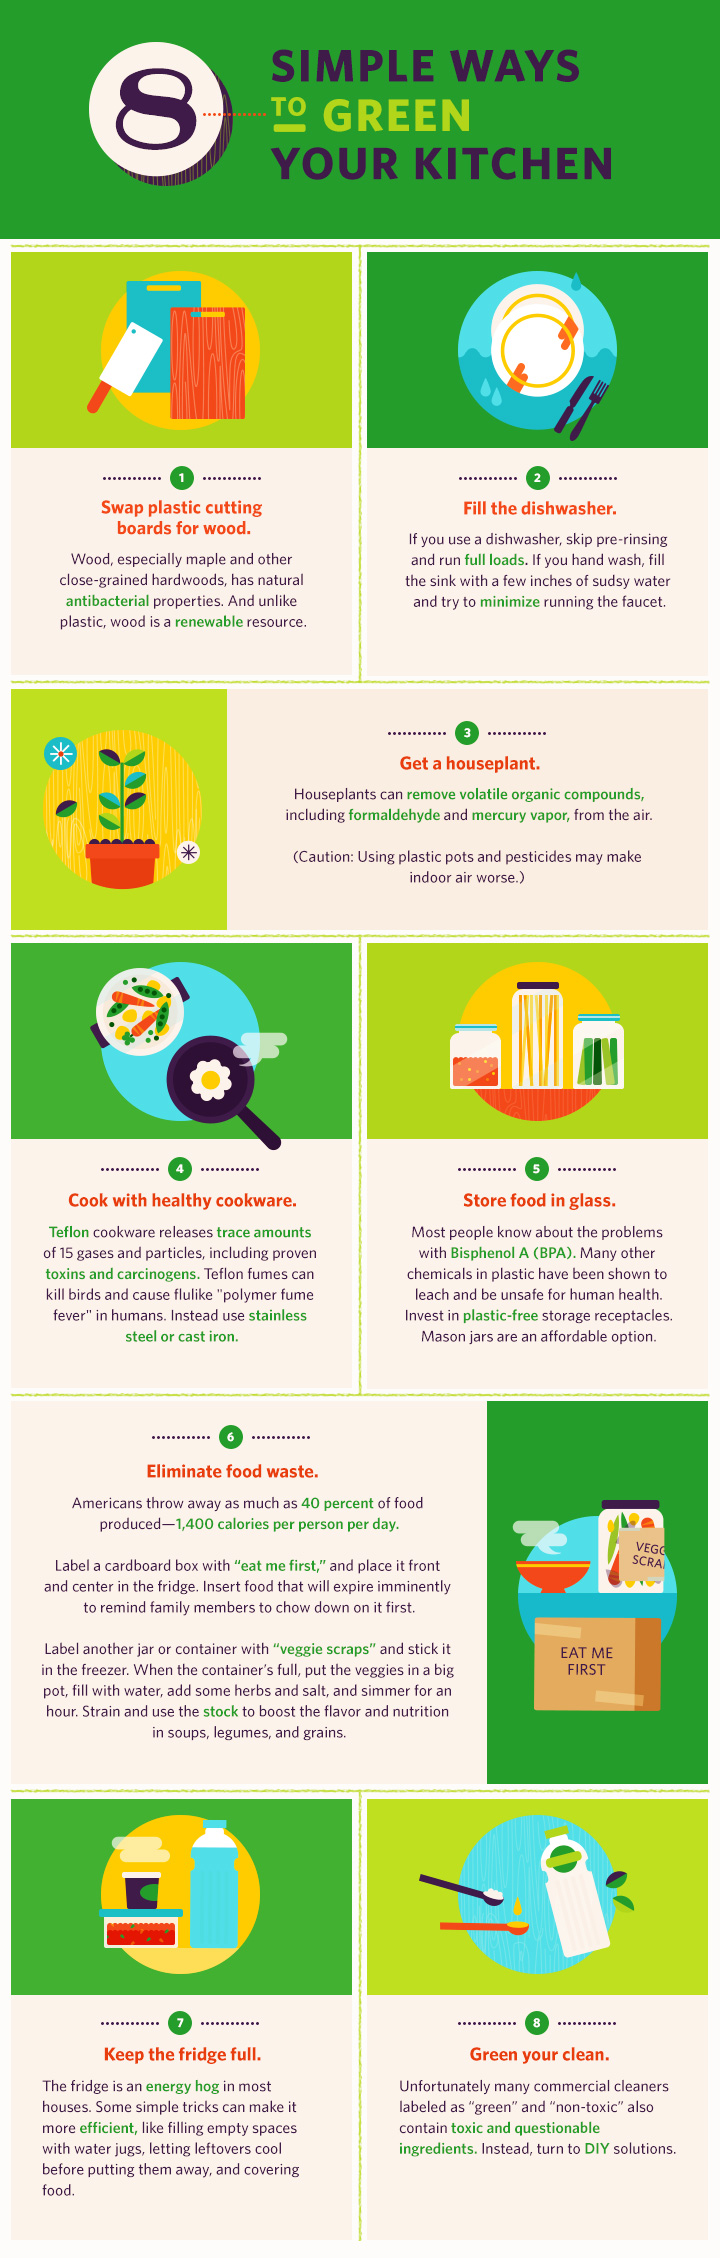 Simple Ways to Green Your Kitchen